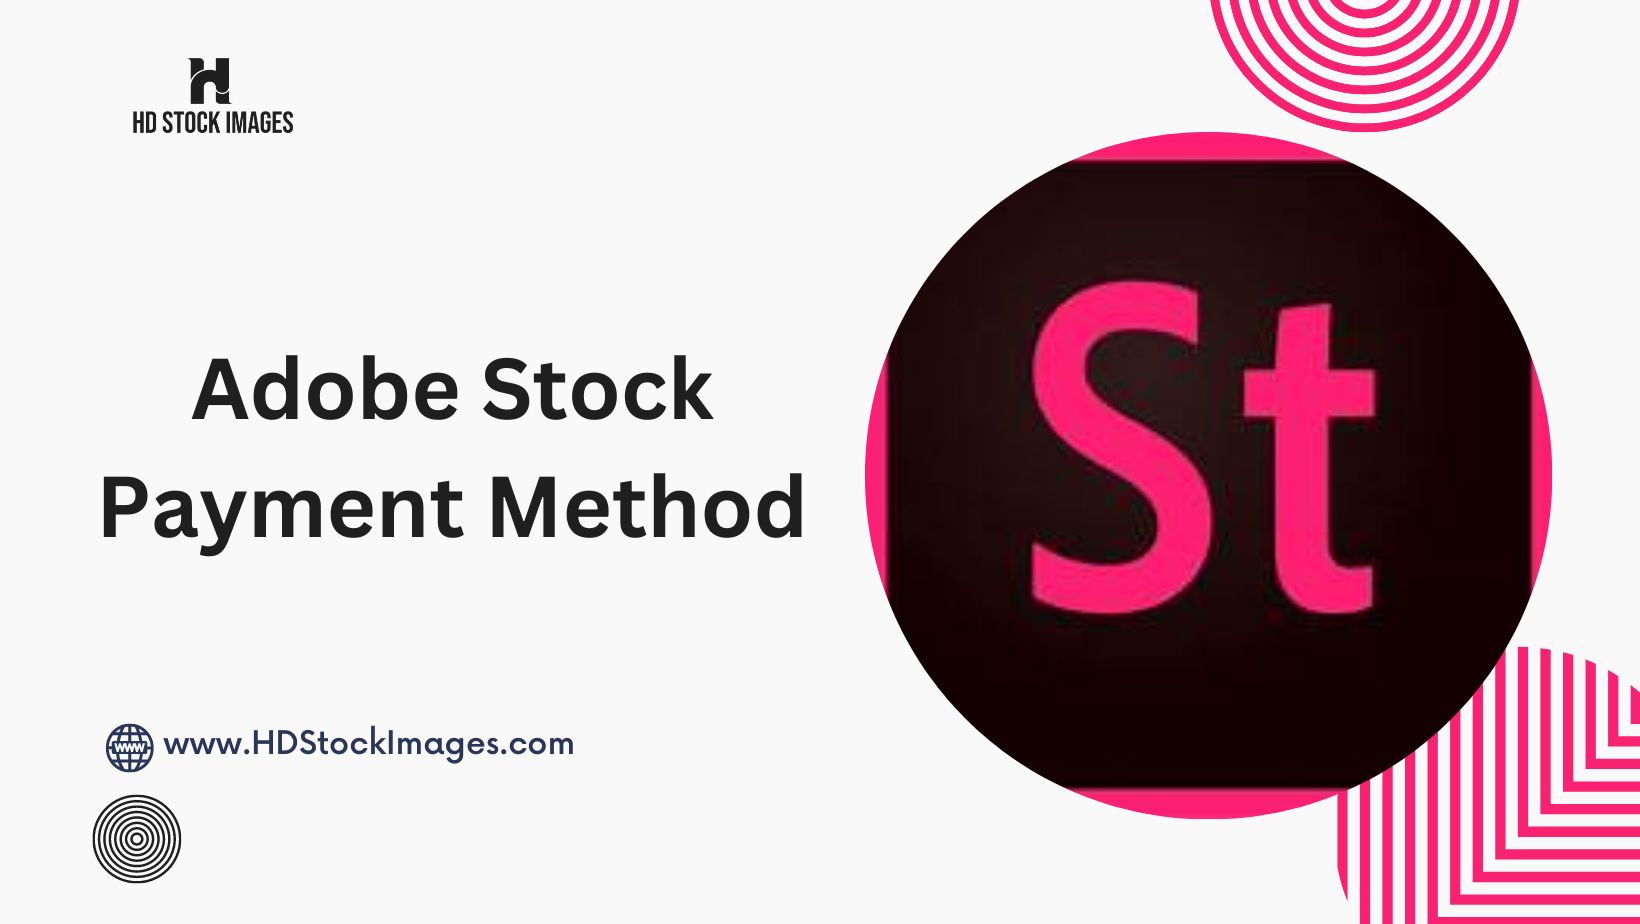 An image of Adobe Stock Payment Method